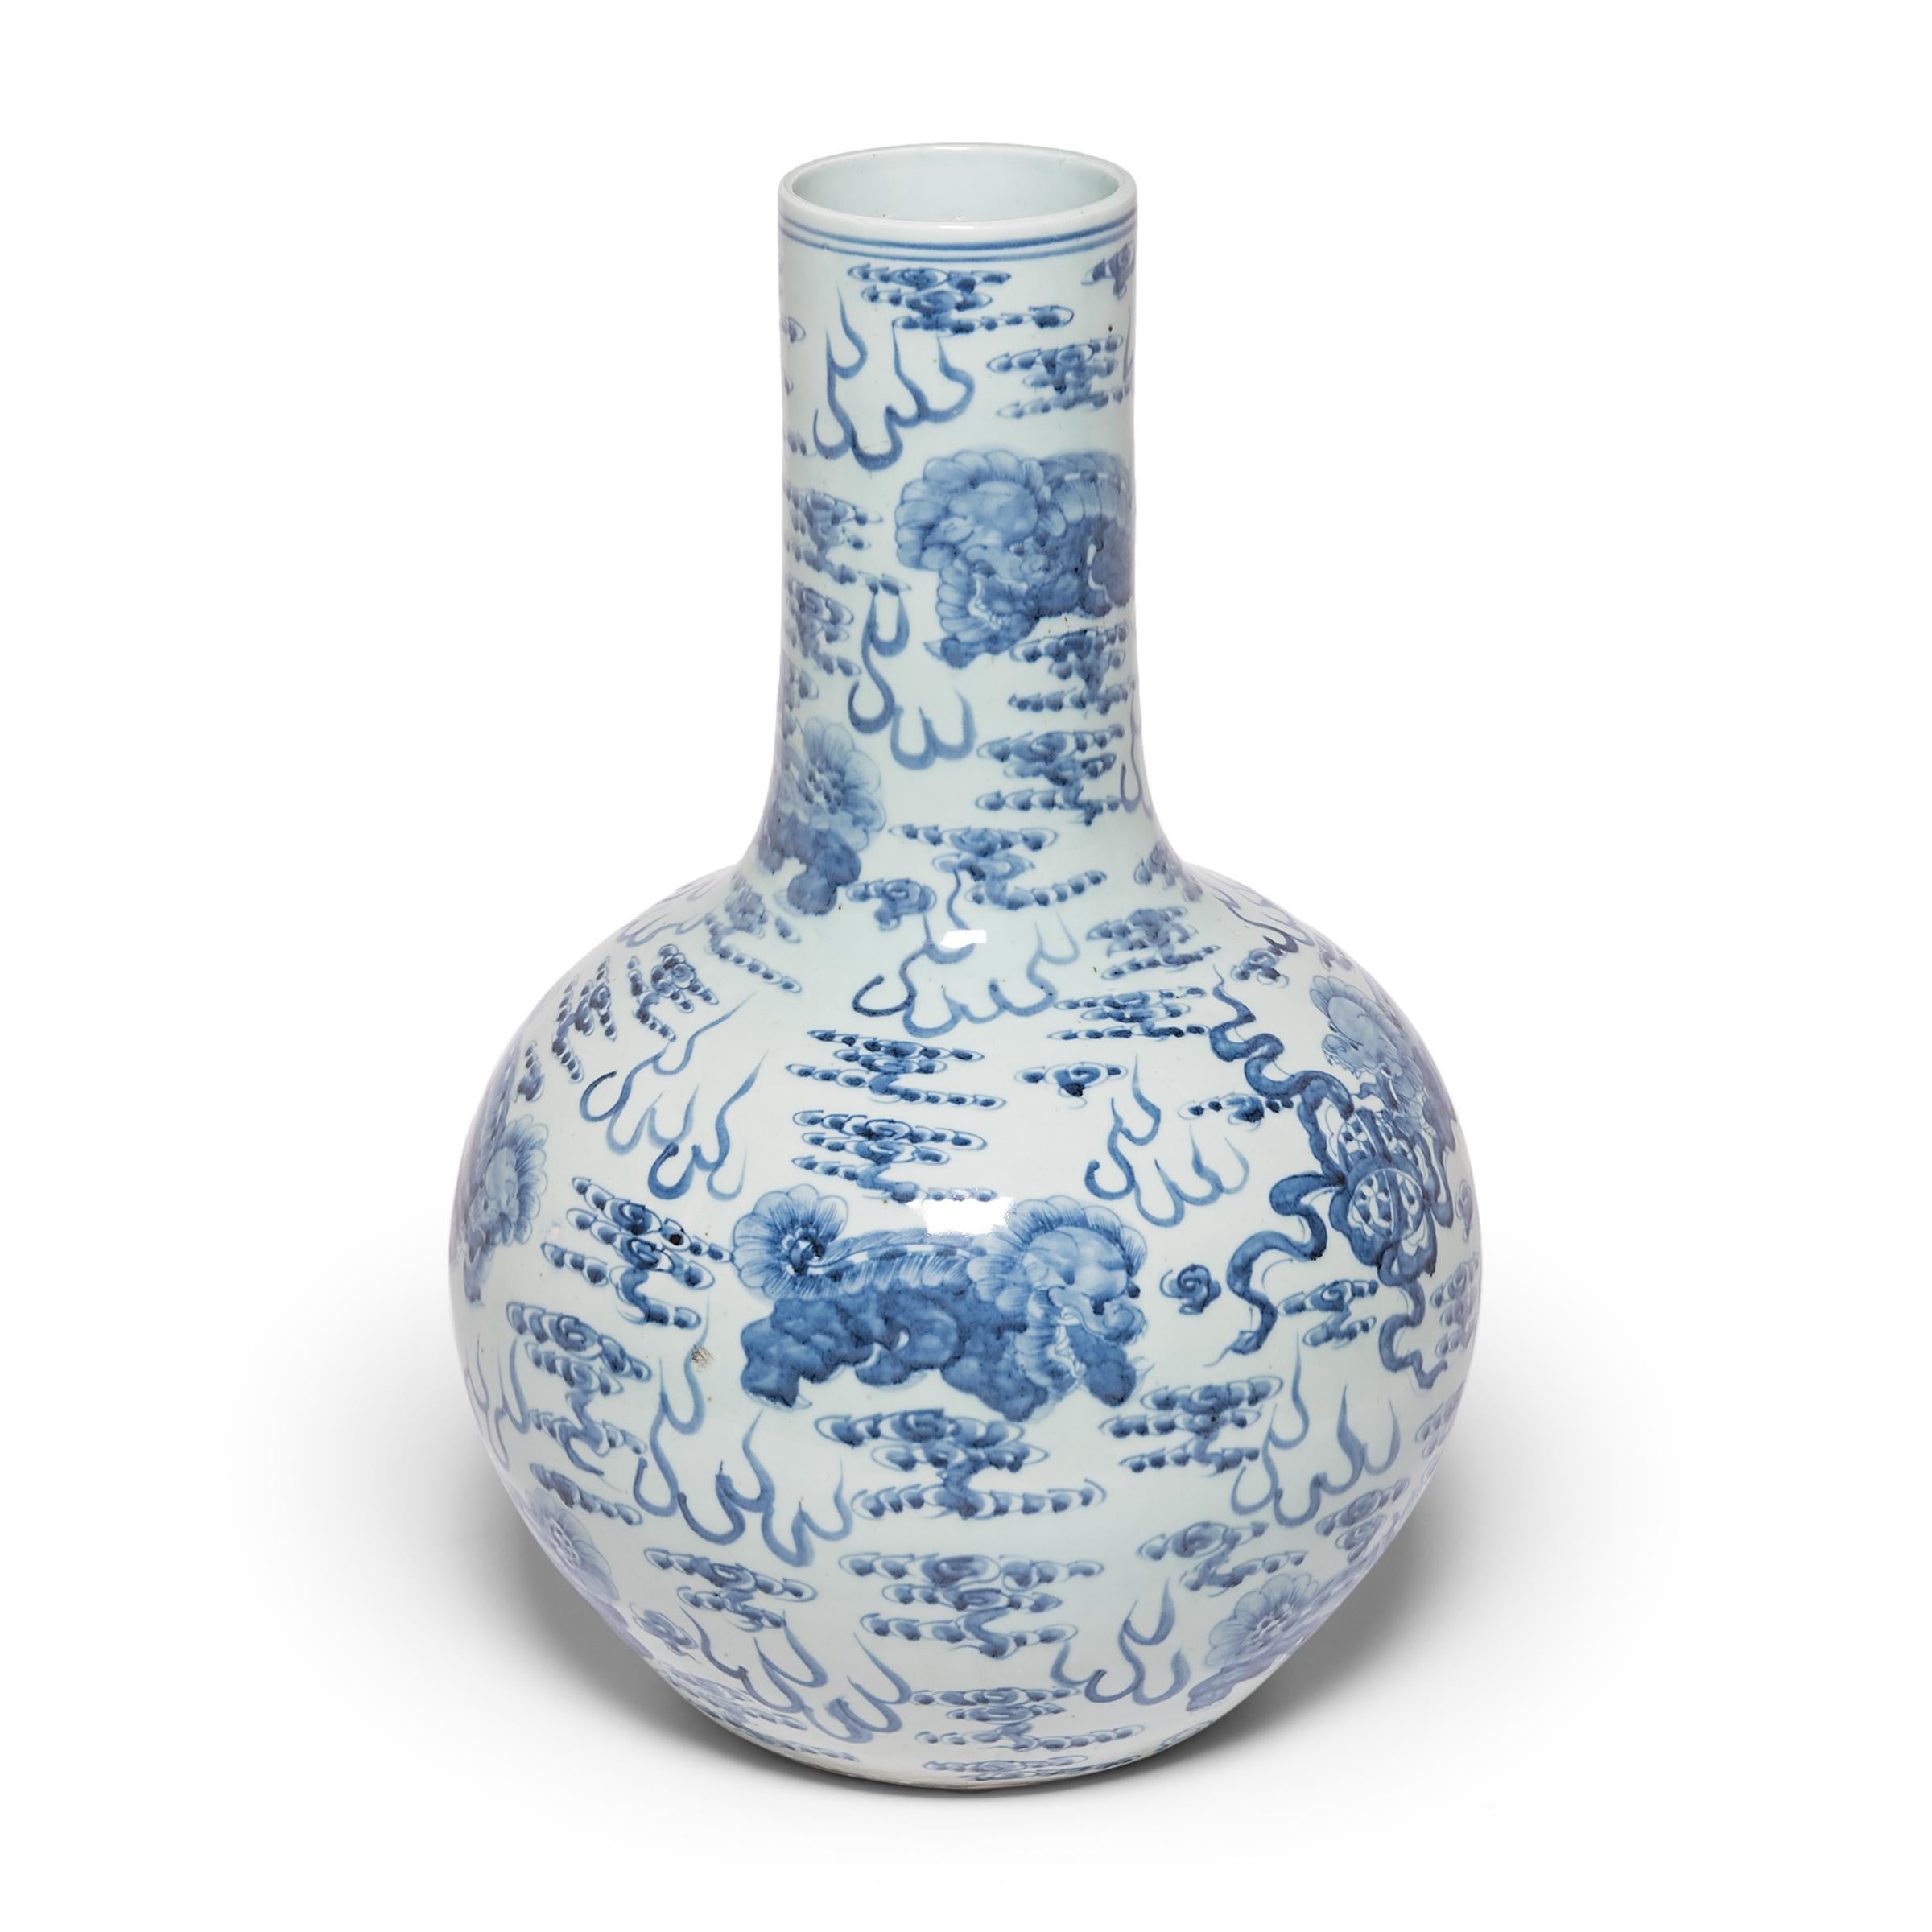 Beautifully rendered with expressive brushwork, the painted decoration on this monumental globular jar demonstrates the exceptional artistry of Chinese blue-and-white porcelain. Guardian Fu lion dogs float amidst celestial clouds, playfully chasing